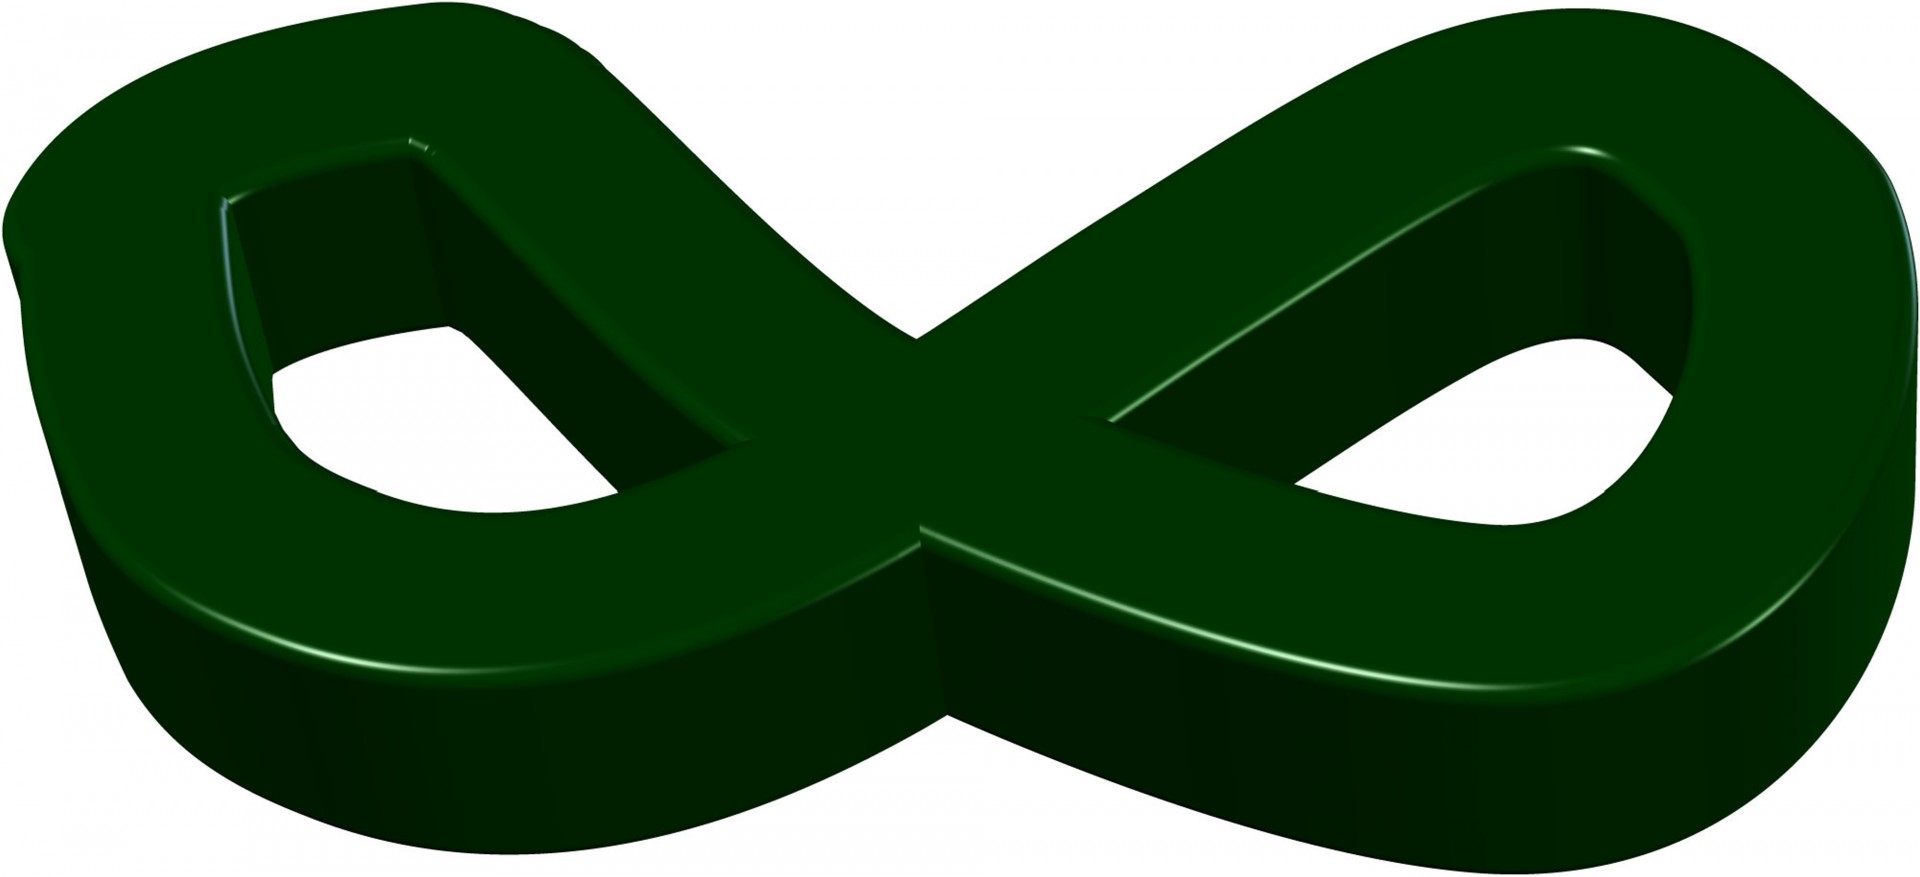 green infinity sign free photo